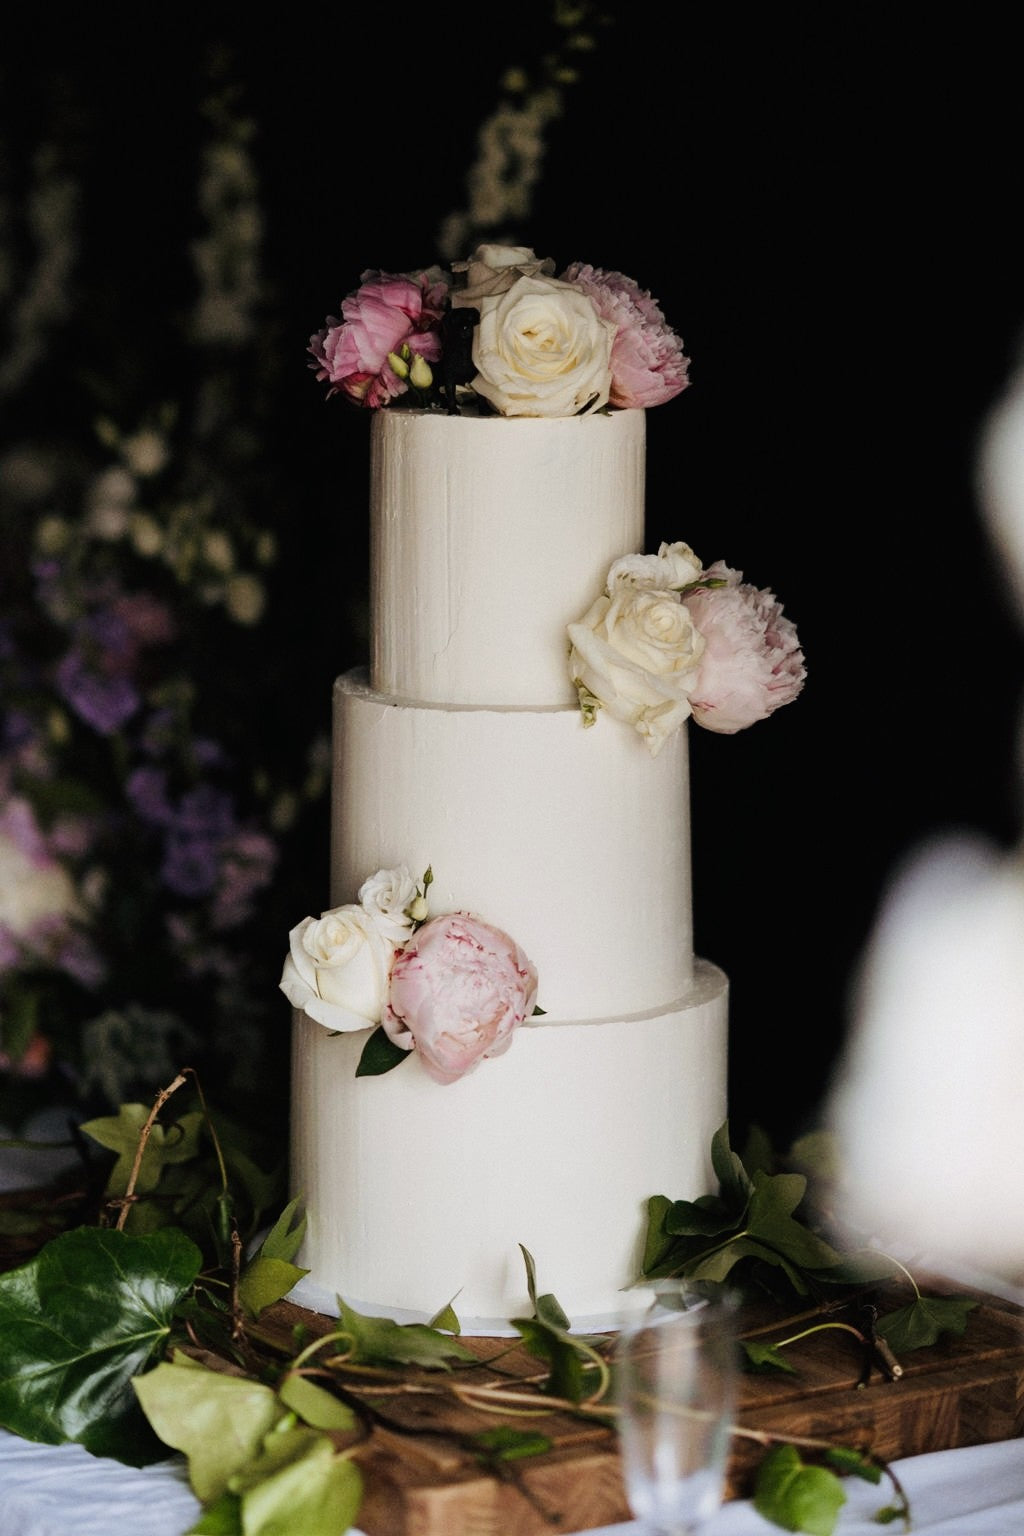 Creating your own wedding cake!